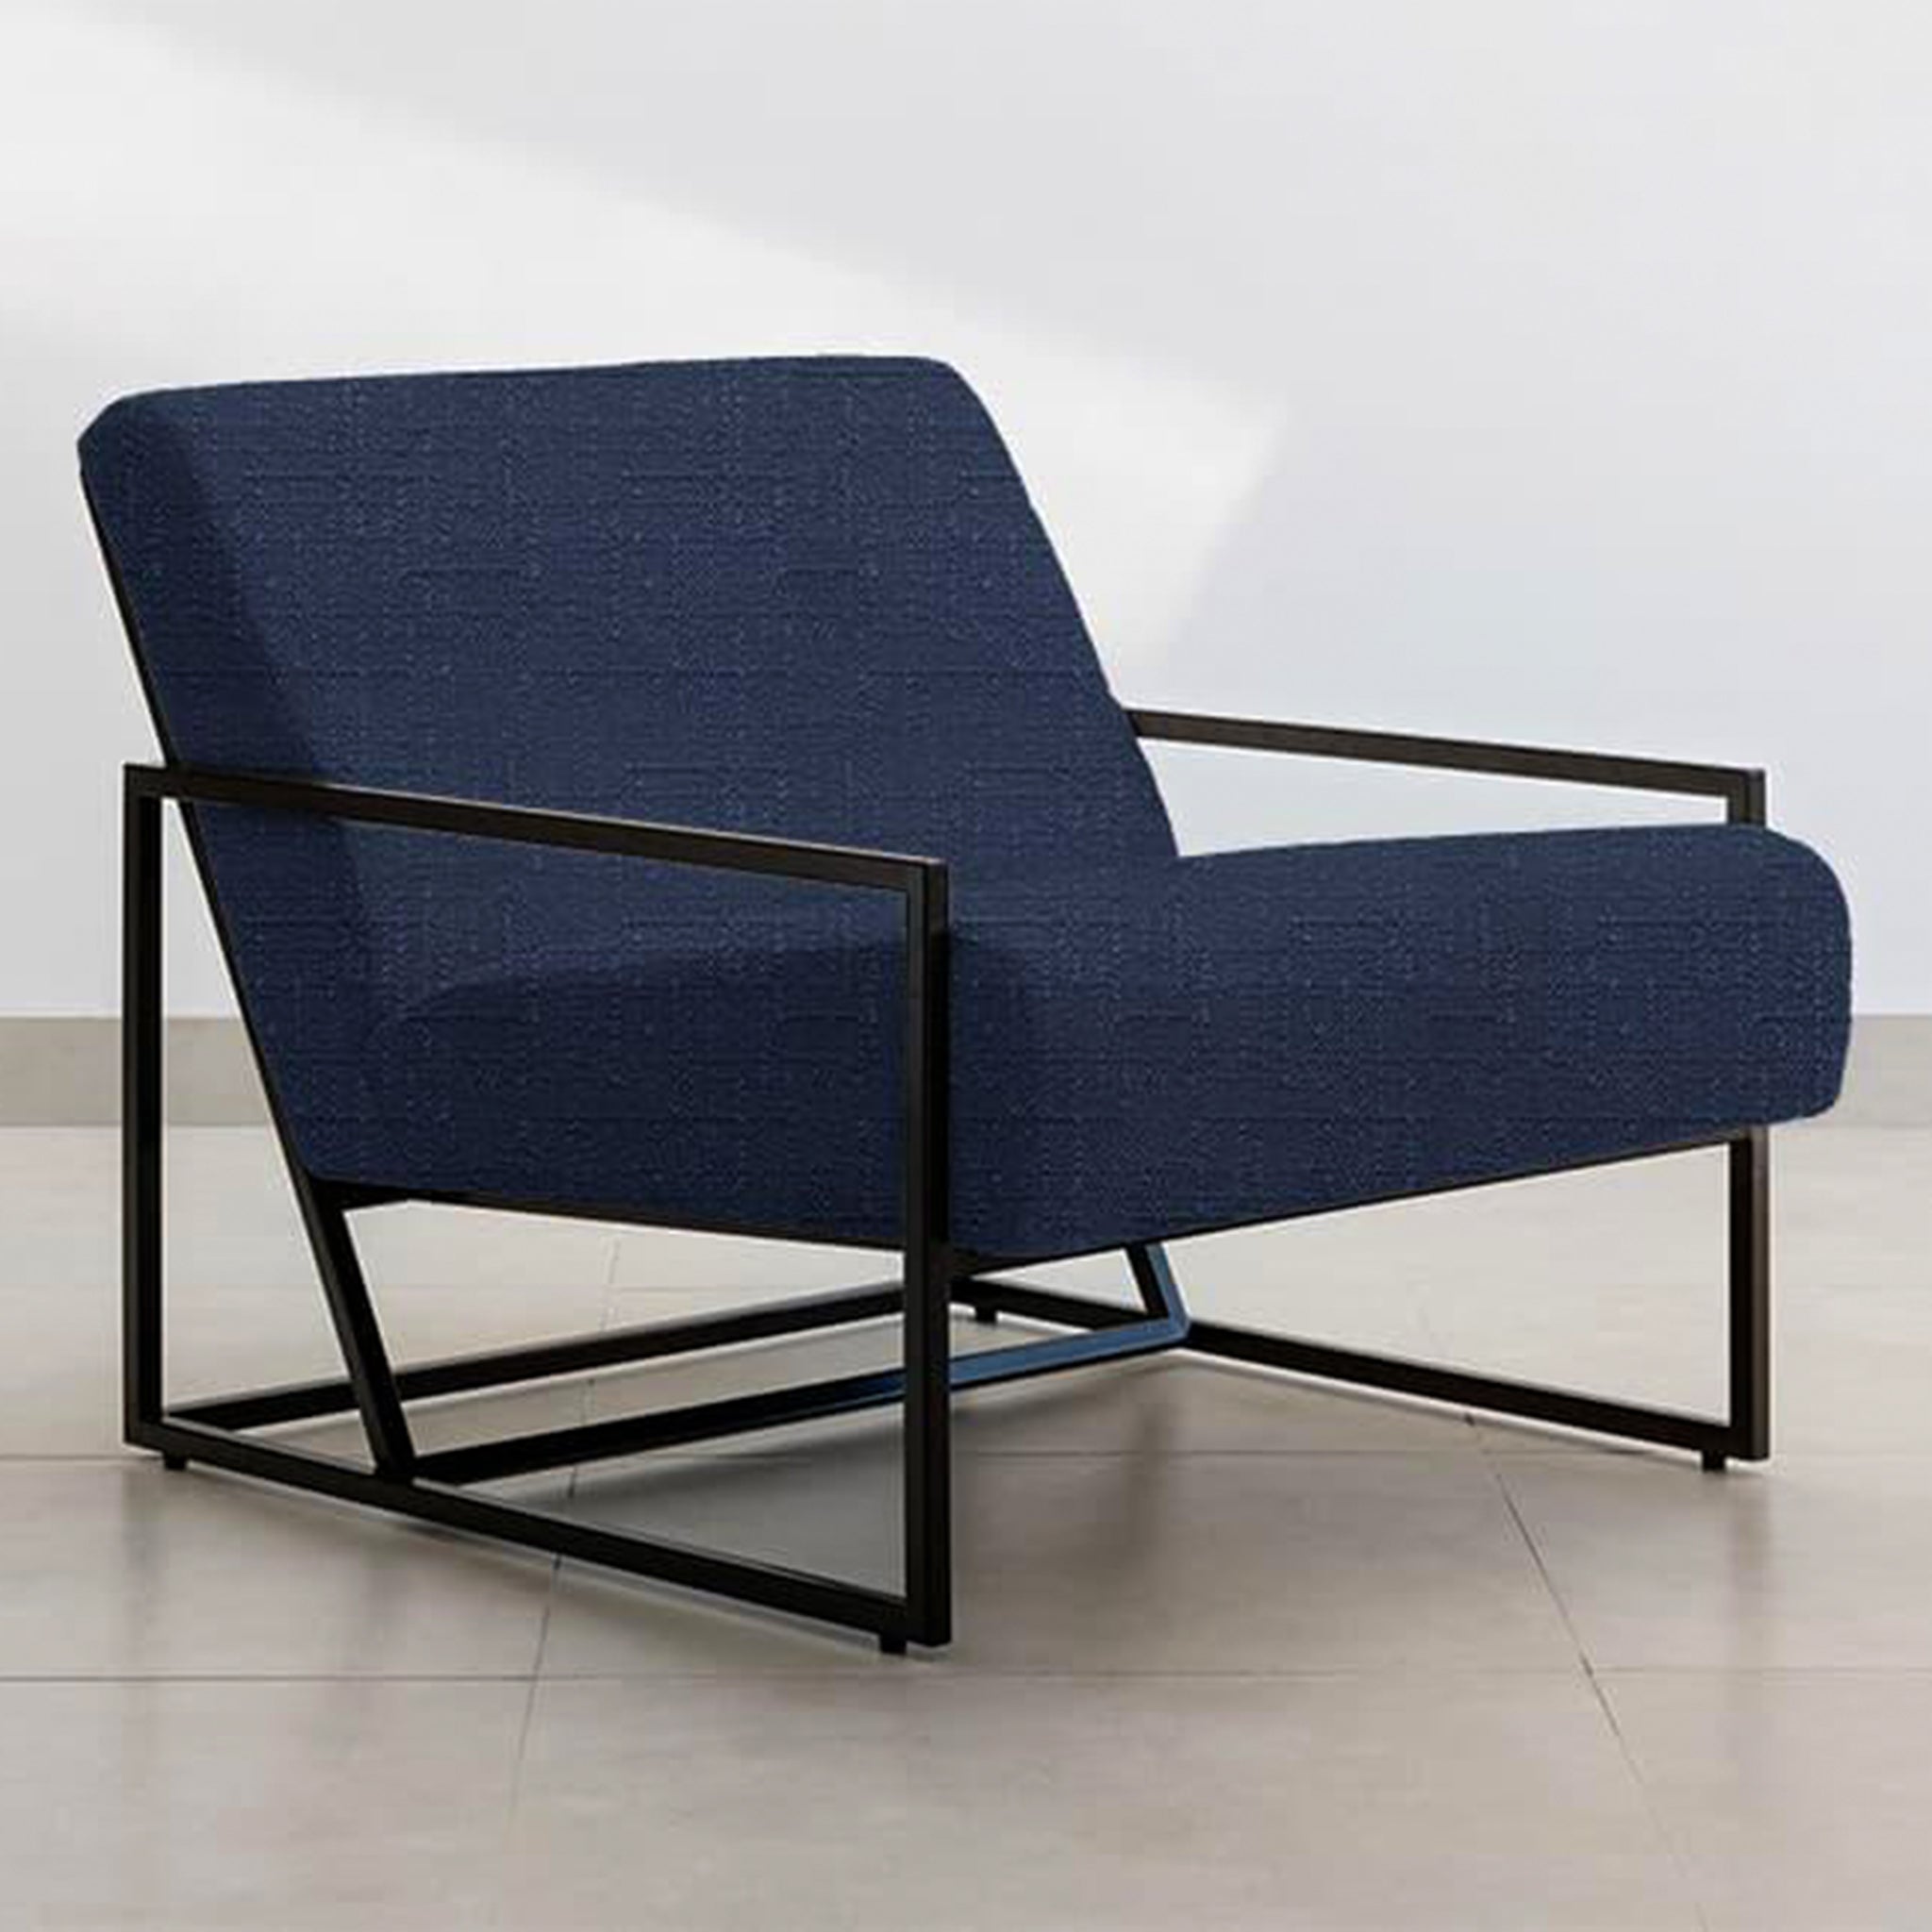 The Daphne Accent Chair with a sleek navy blue fabric and black metal frame, positioned in a modern living room.